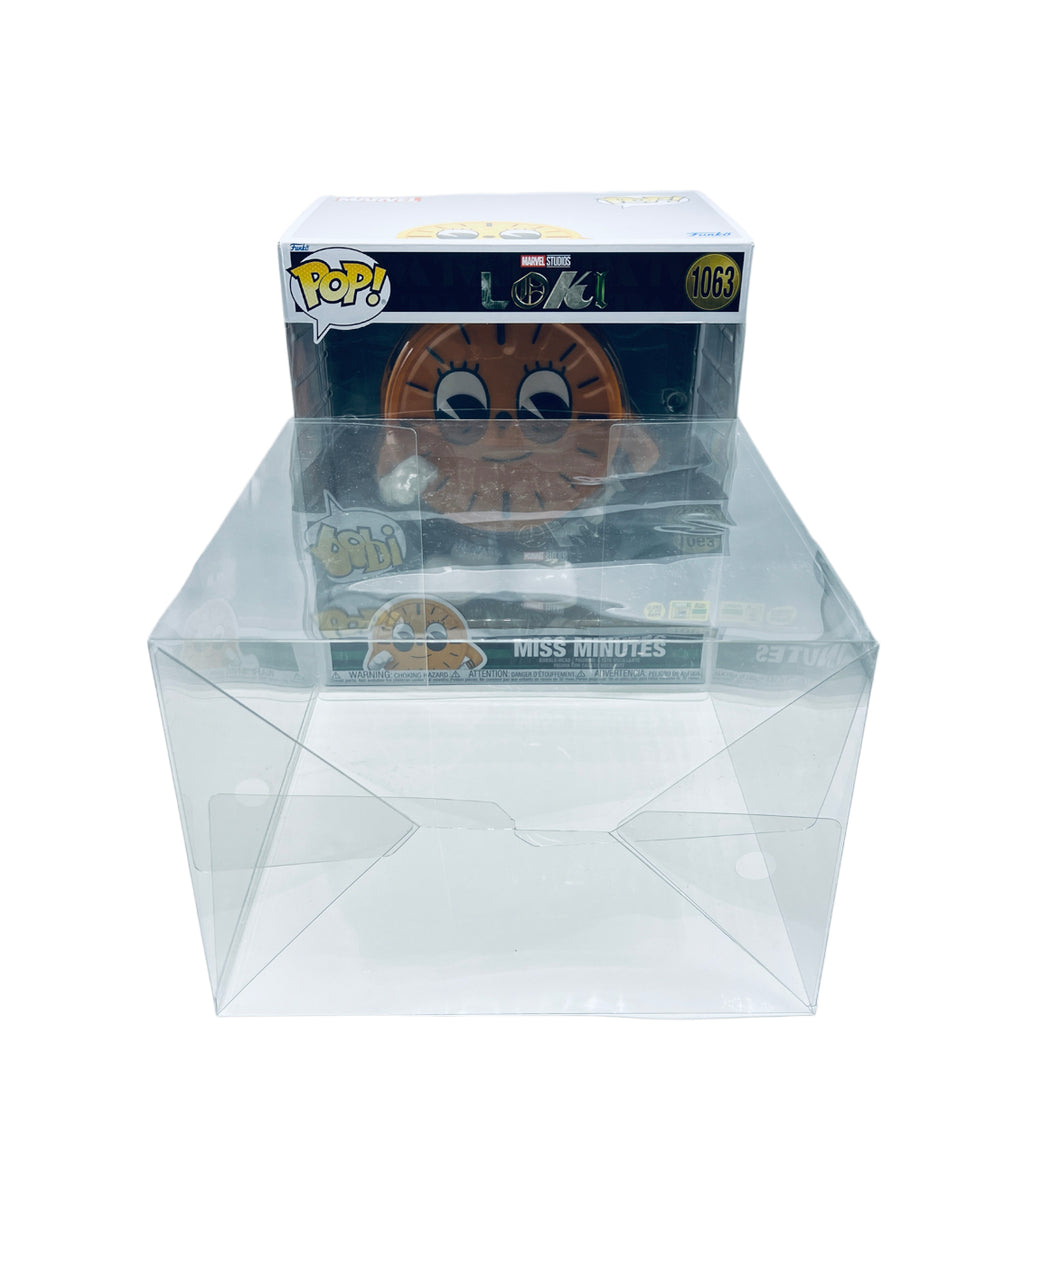 NEW WIDE SIZE 10 Inch Funko POP! Box Protector made with 0.50mm thick PET Acid-Free Plastic